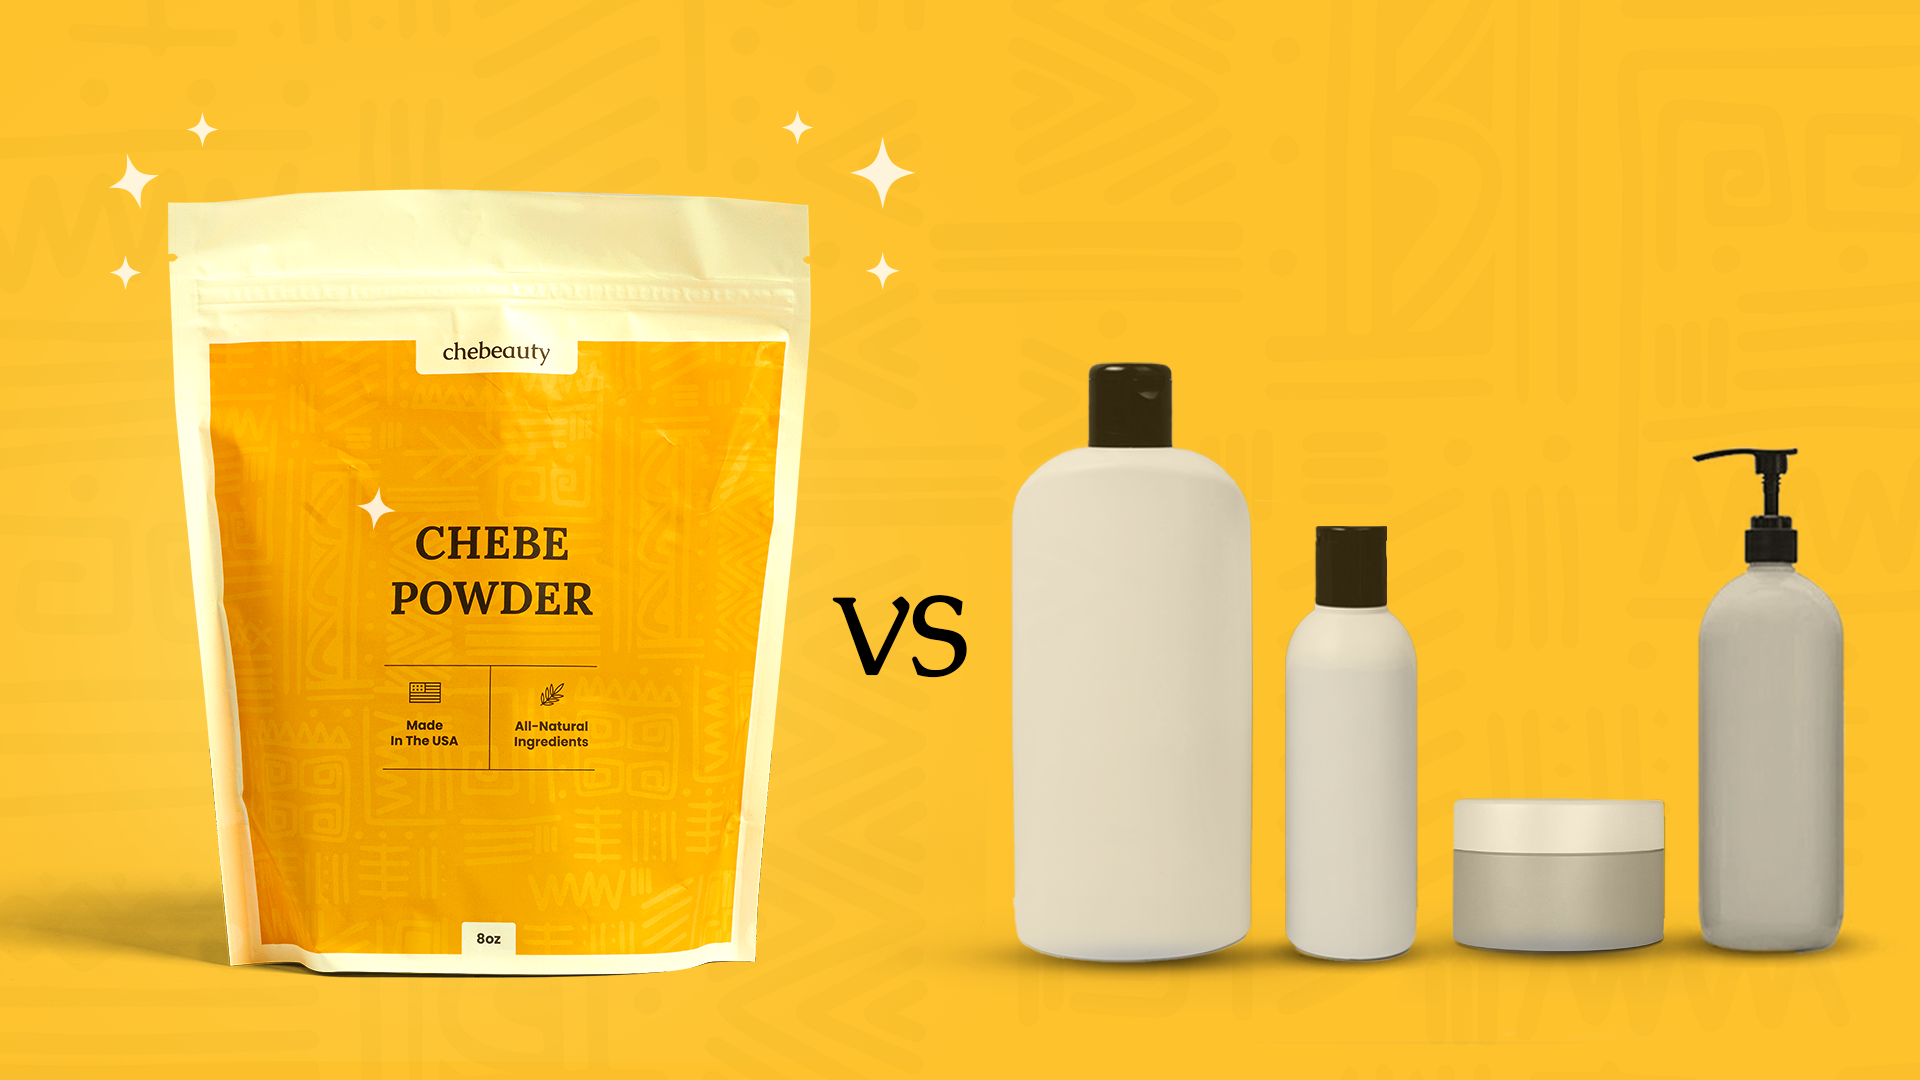 What sets Chebe Powder apart from other hair care products on the market?